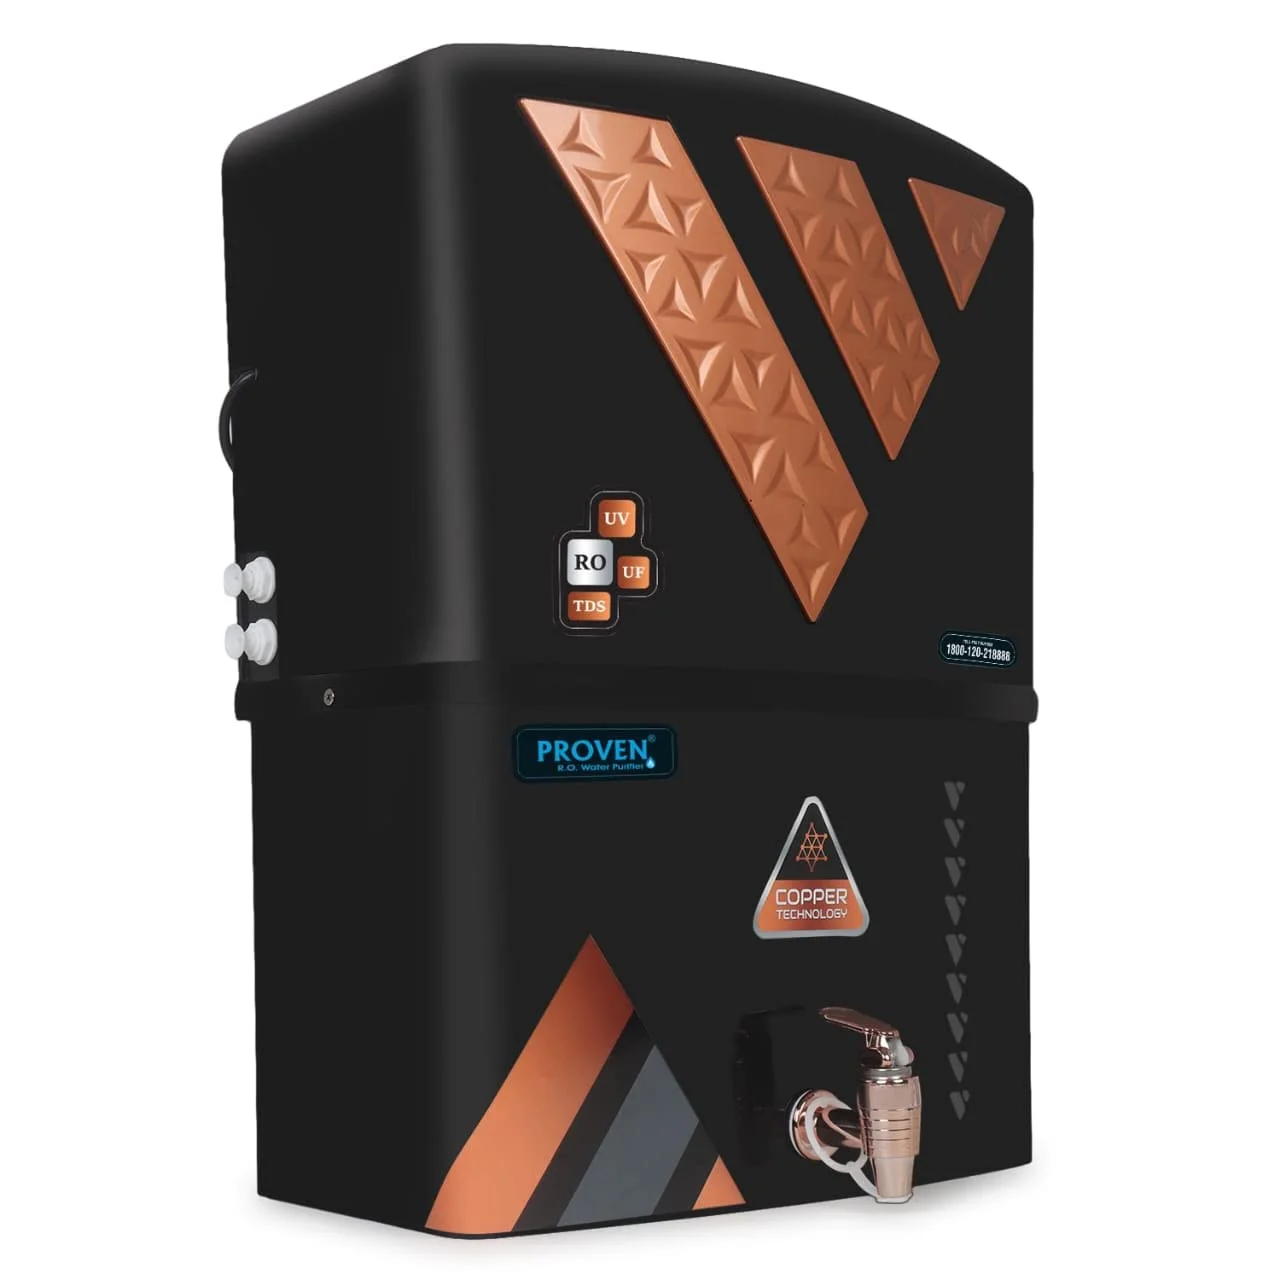 Proven Copper + Mineral Ro Water Purifier